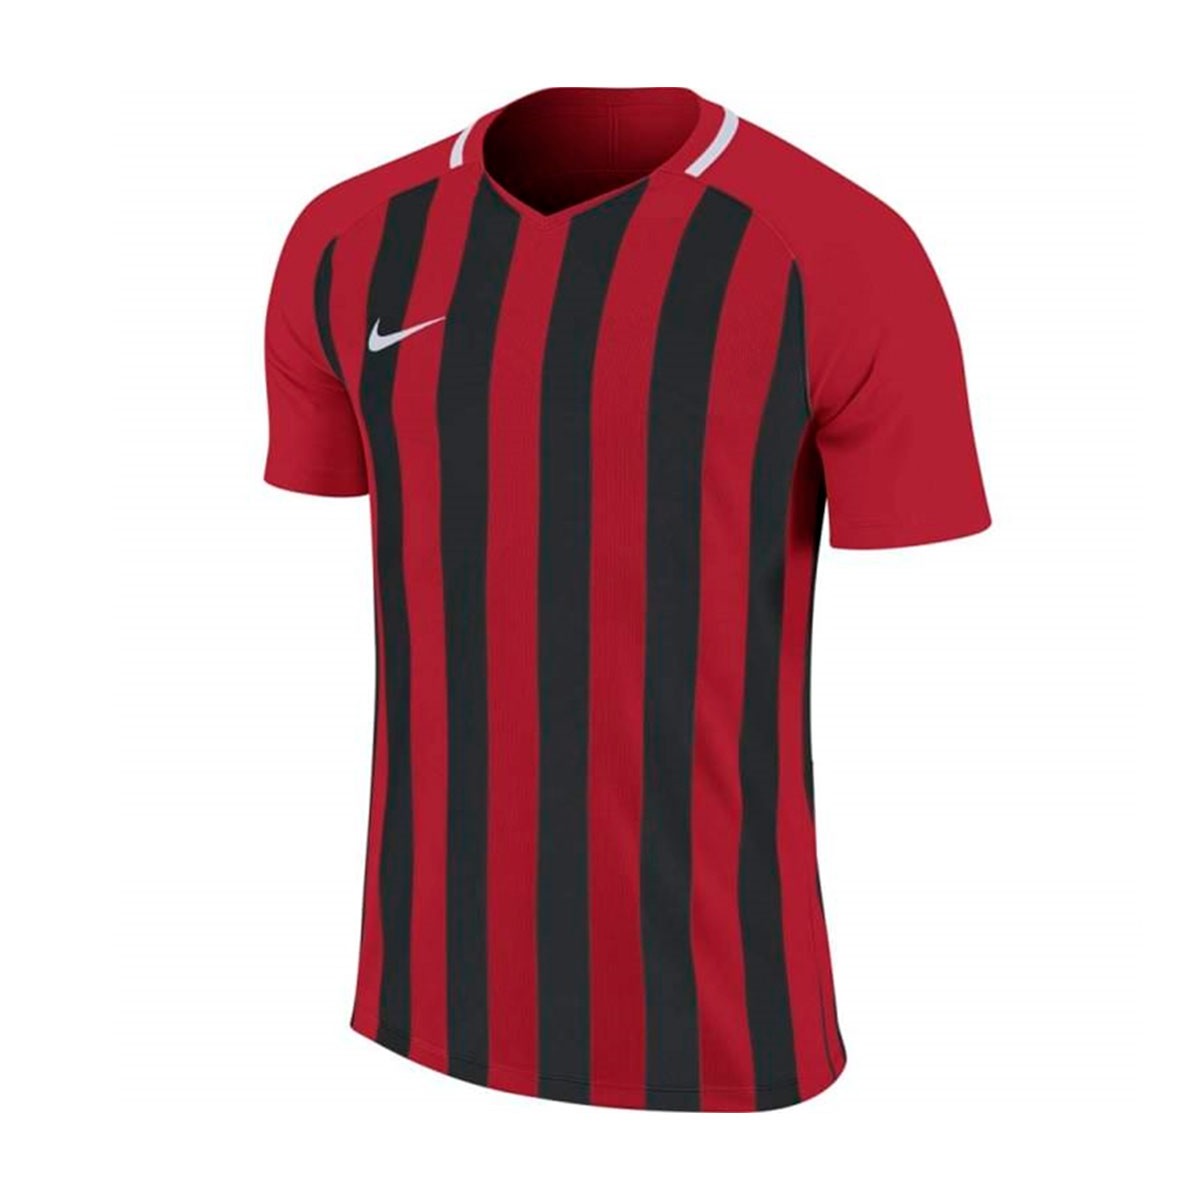 nike striped division iii jersey